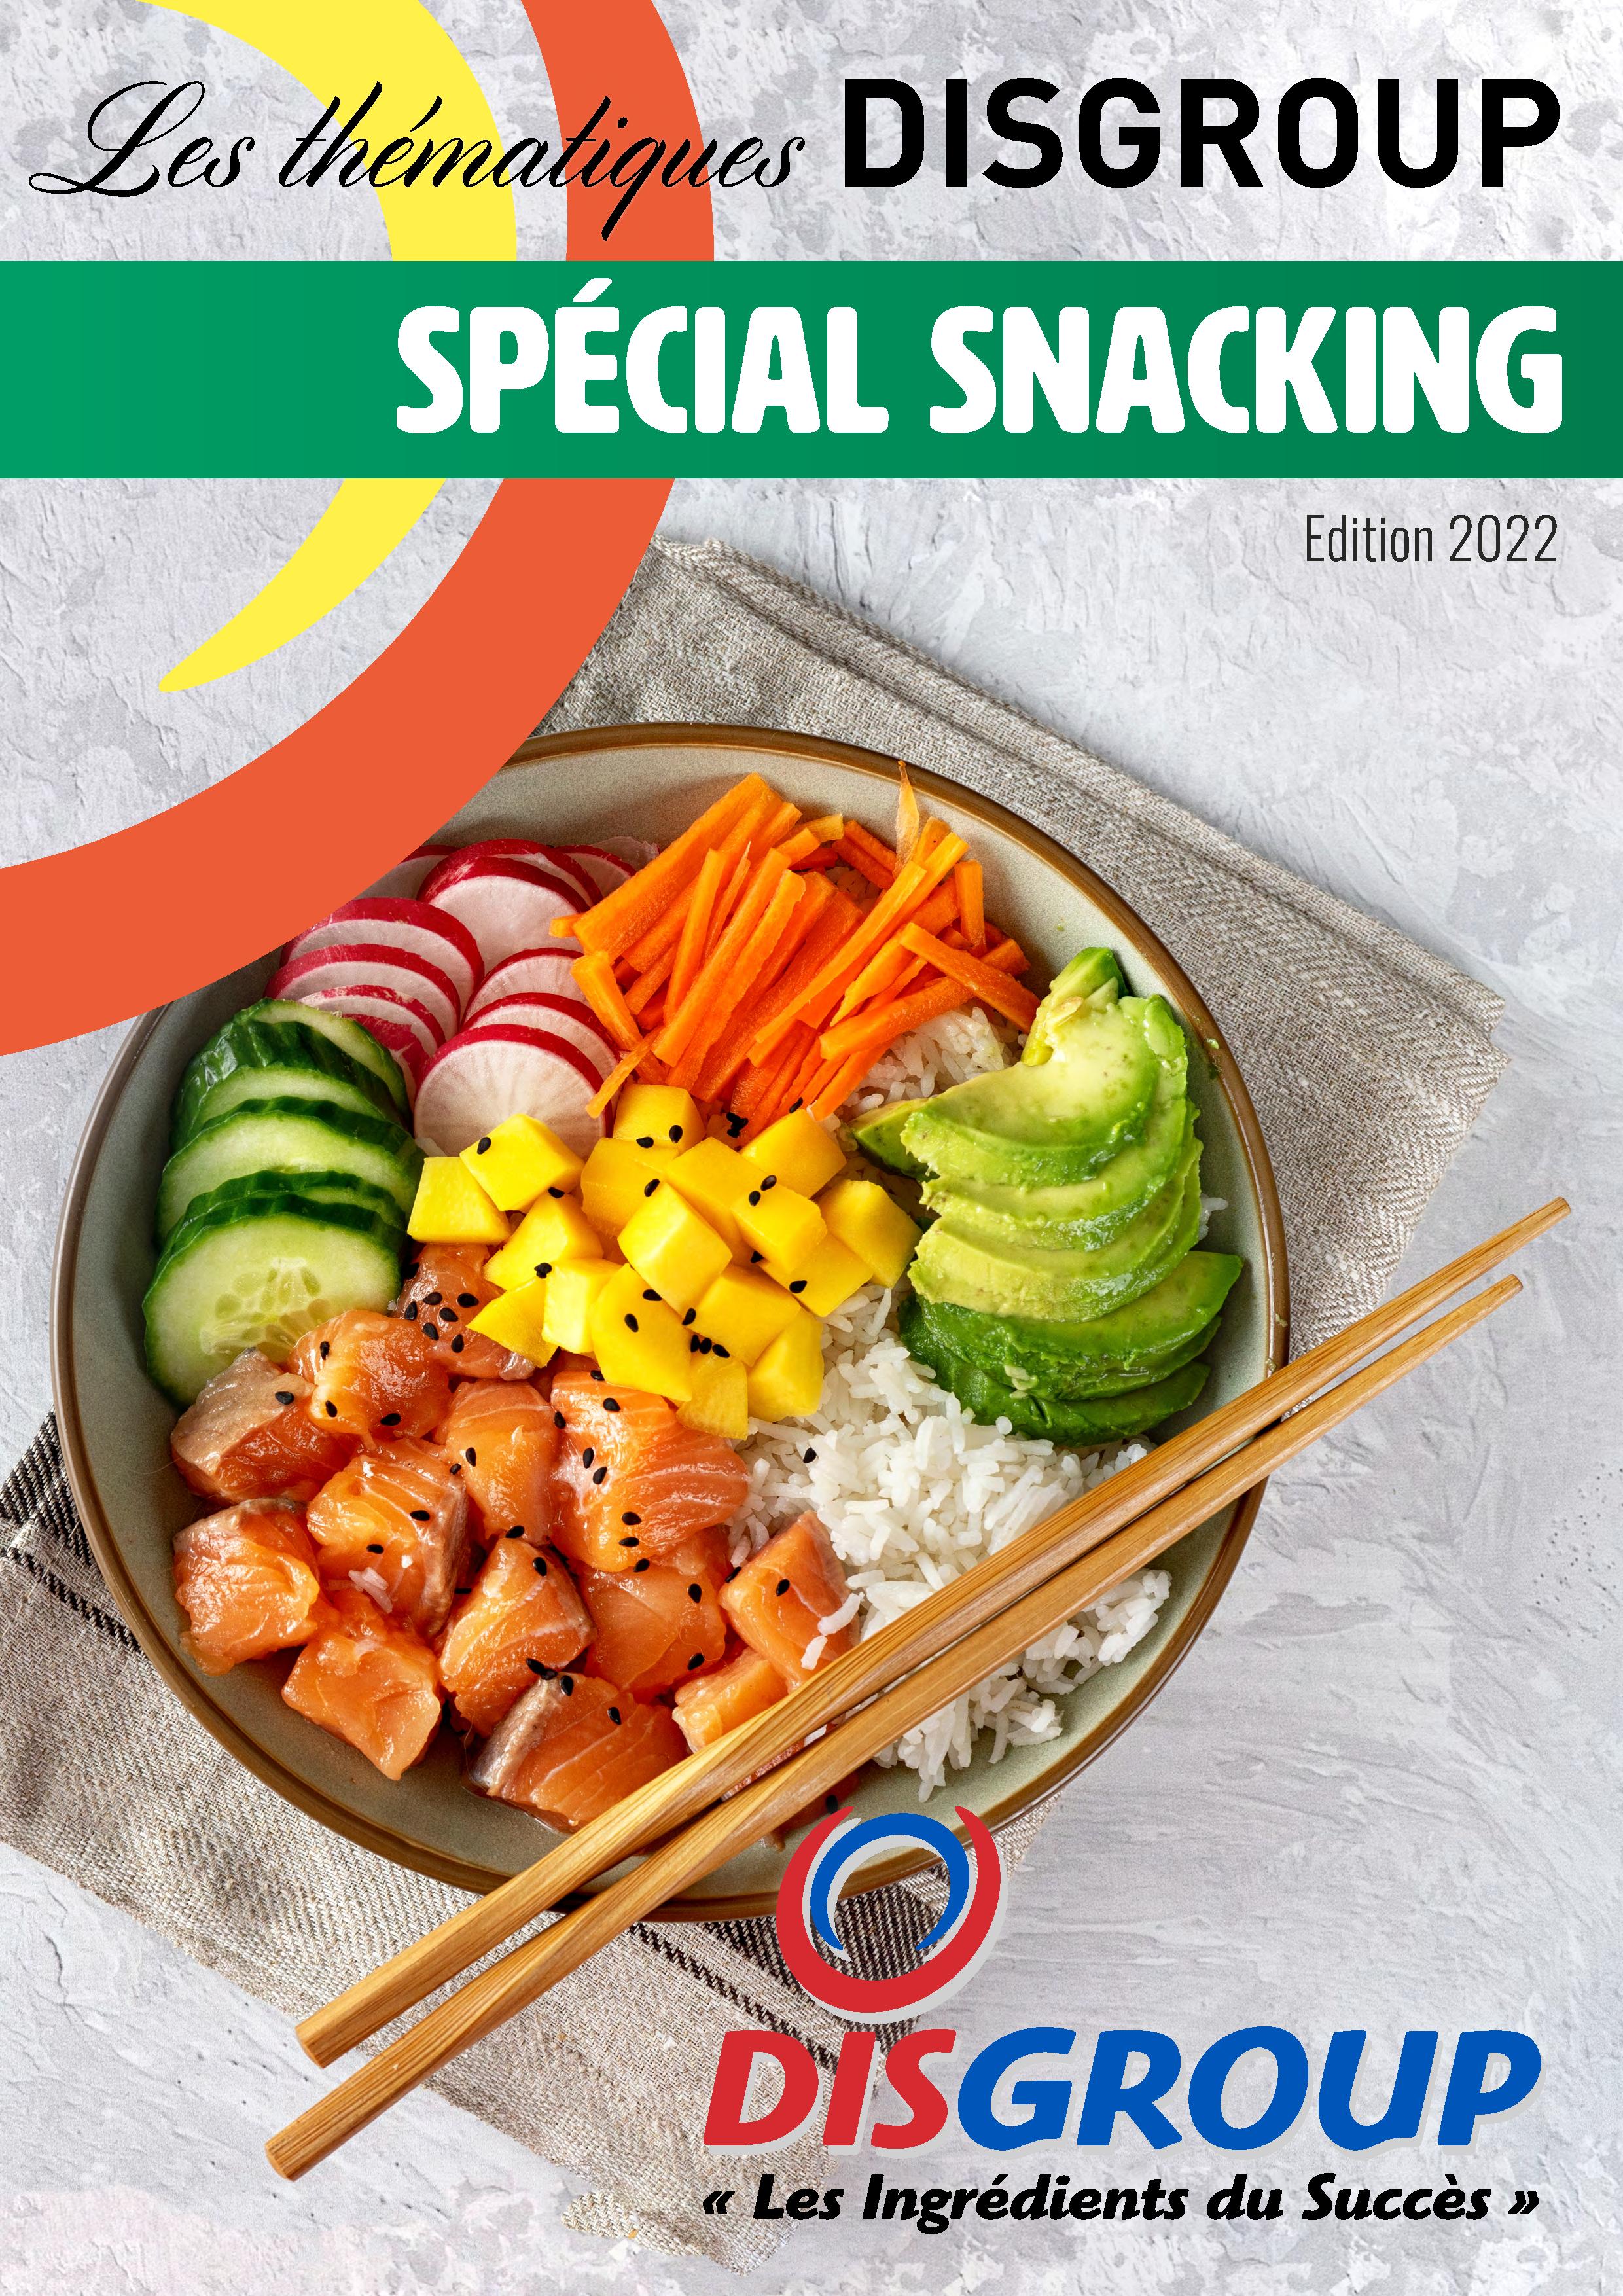 catalogue thematique special snacking 2022 984 001